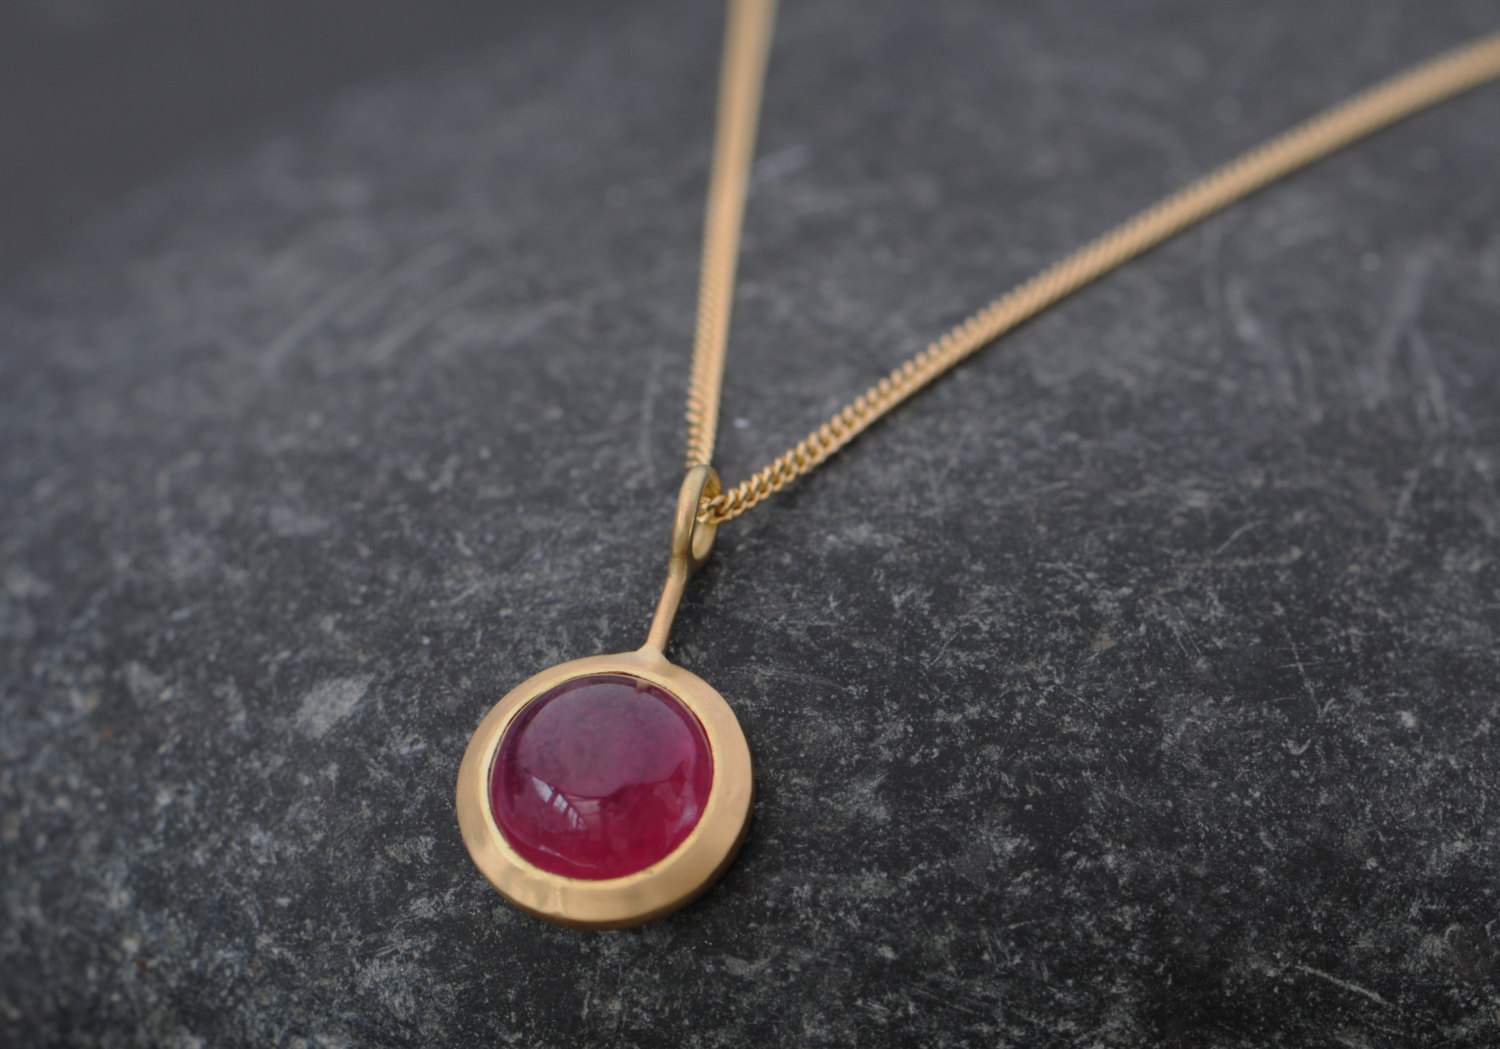 Beautiful Ruby 'Lollipop' necklace, set in 18k Yellow Gold. Fracture filled ruby cabochon is 8mm across and 3 carats by William White